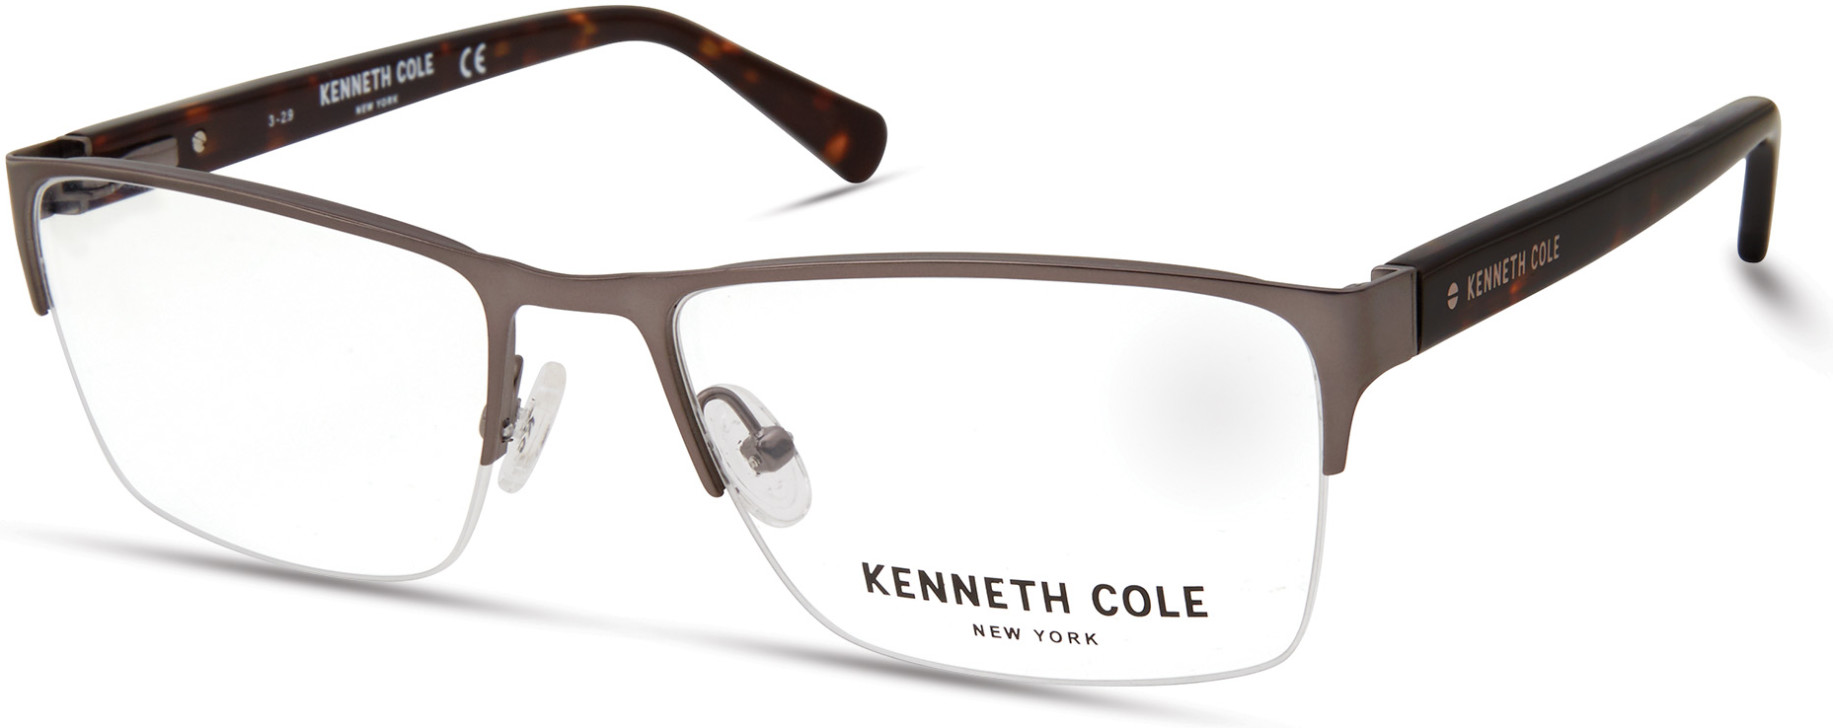 KENNETH COLE NY 0313 008